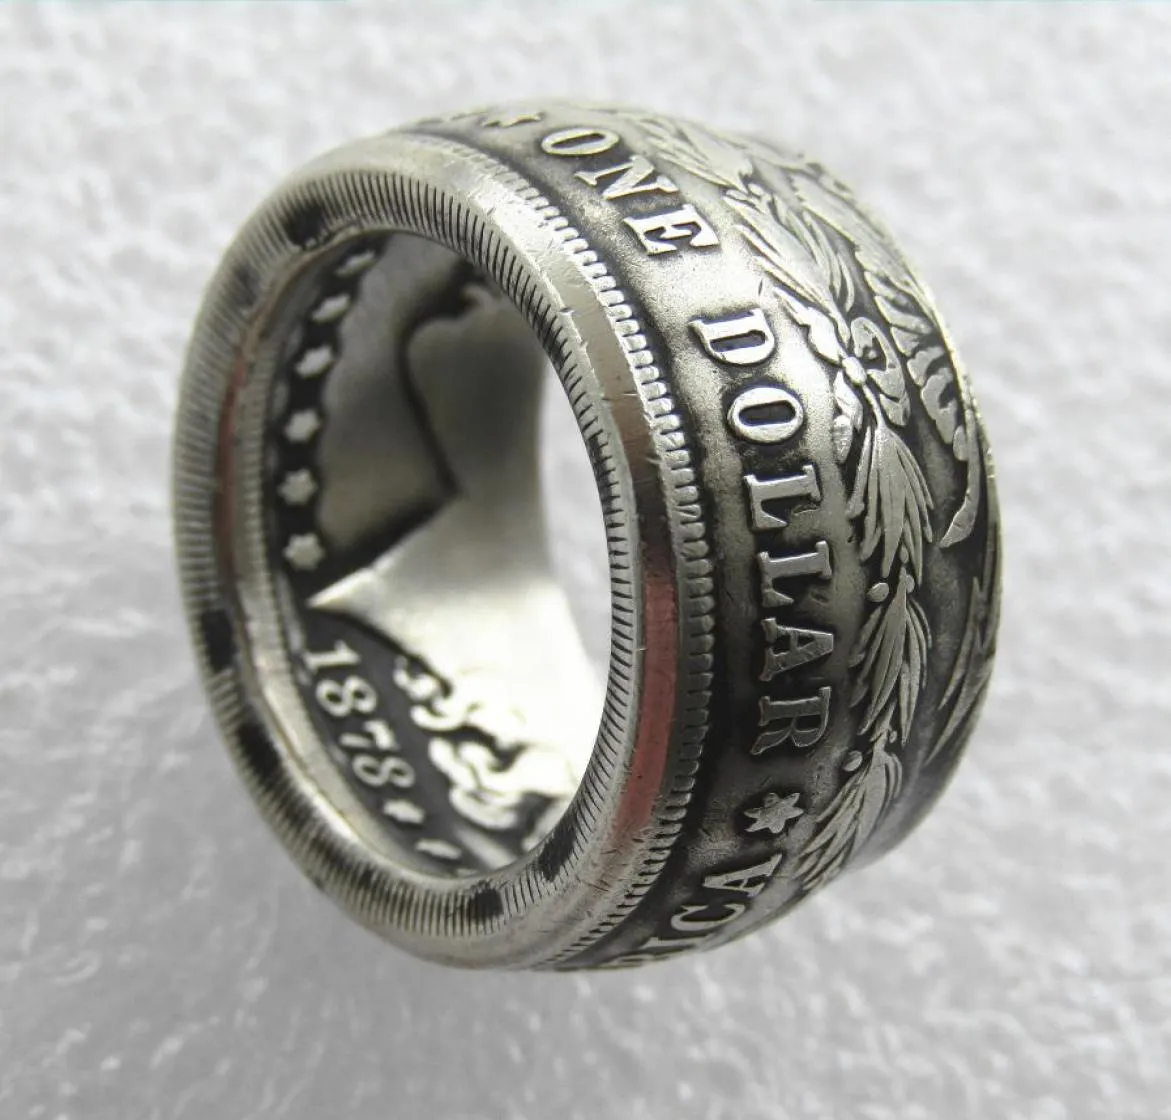 Selling Silver Plated Morgan Silver Dollar Coin Ring 039Heads039 Handmade In Sizes 816 high quality7031391